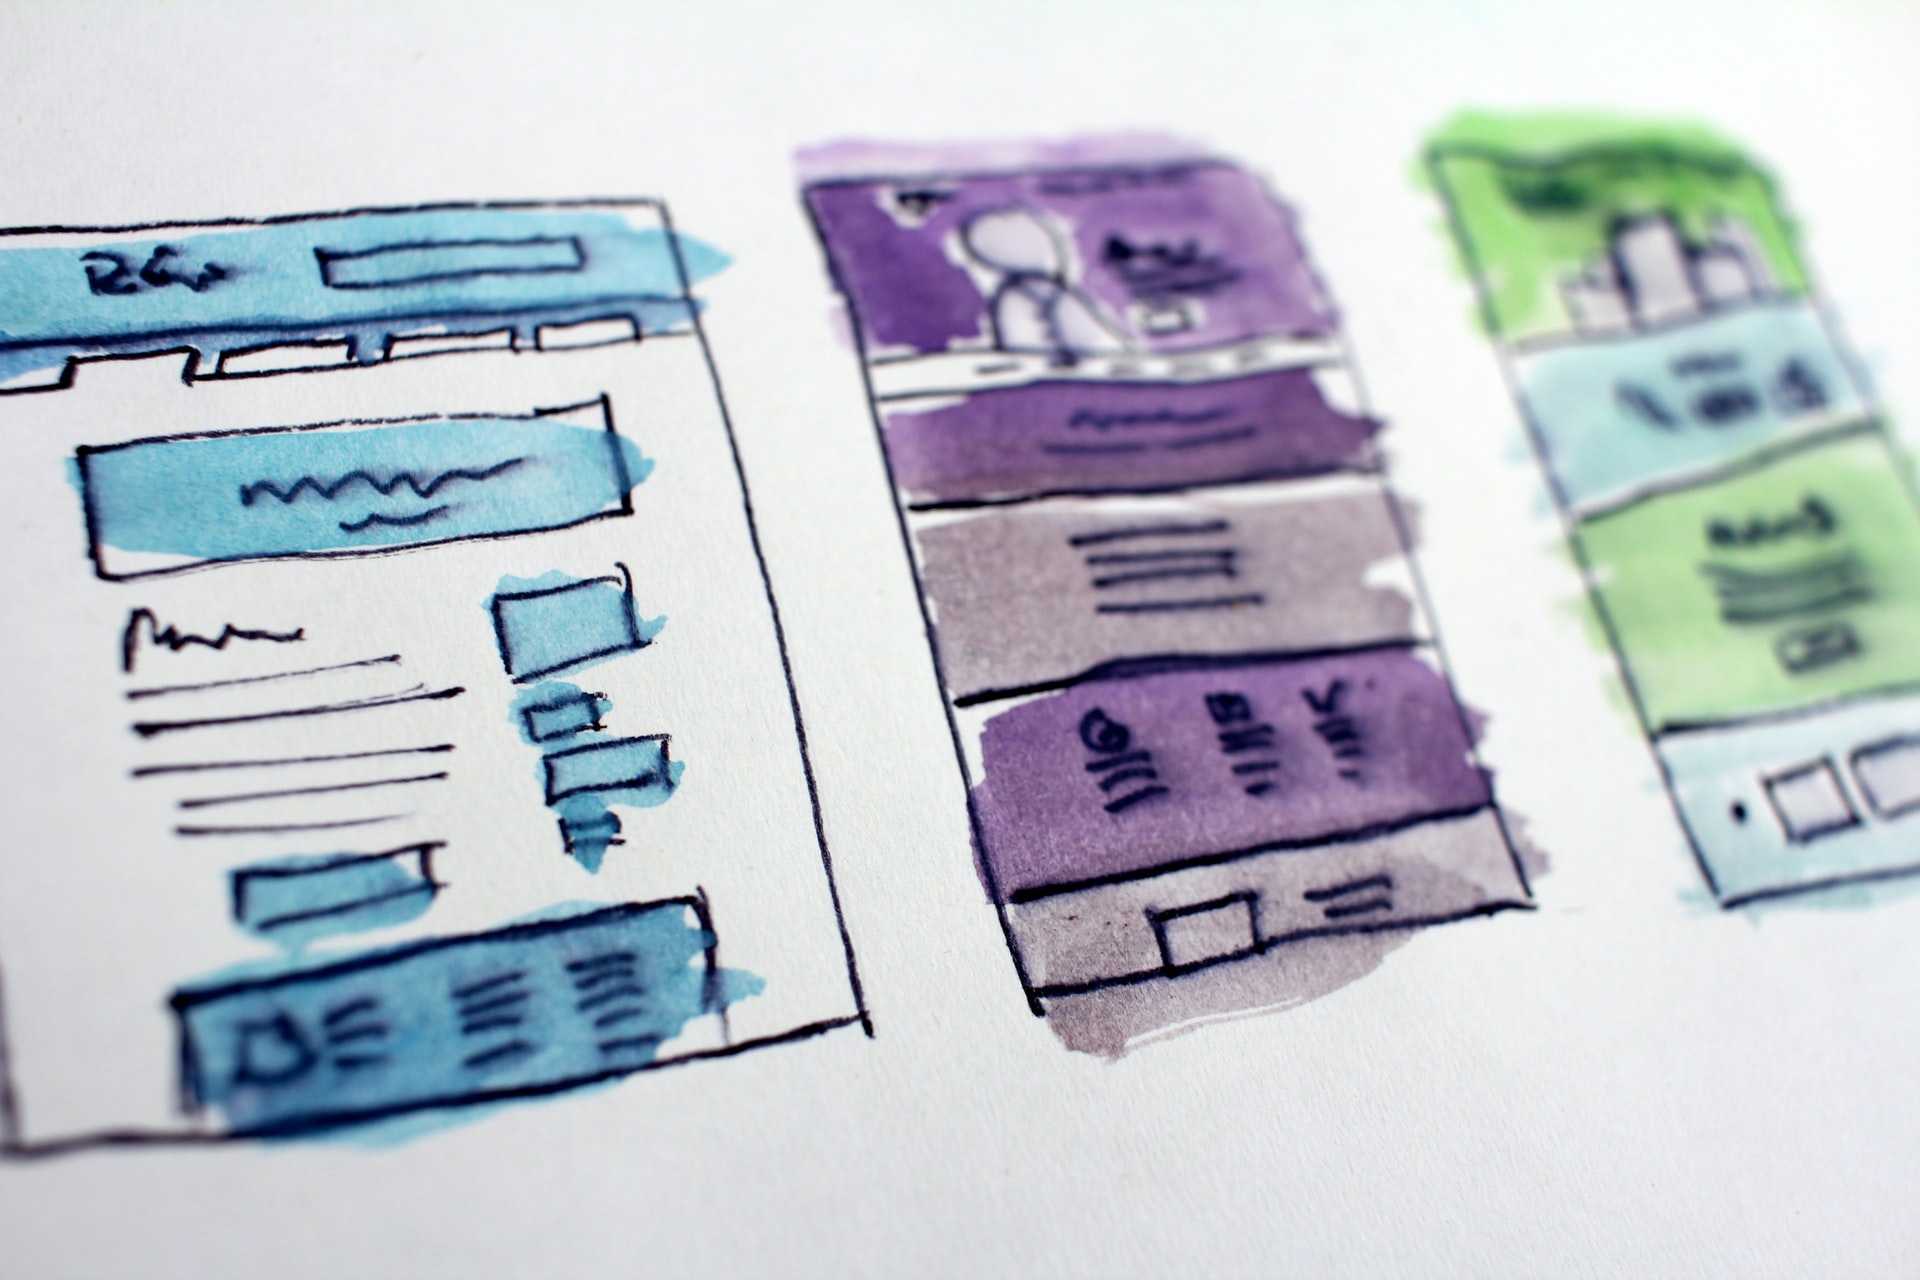 Watercolor and ink website wireframe drawins.